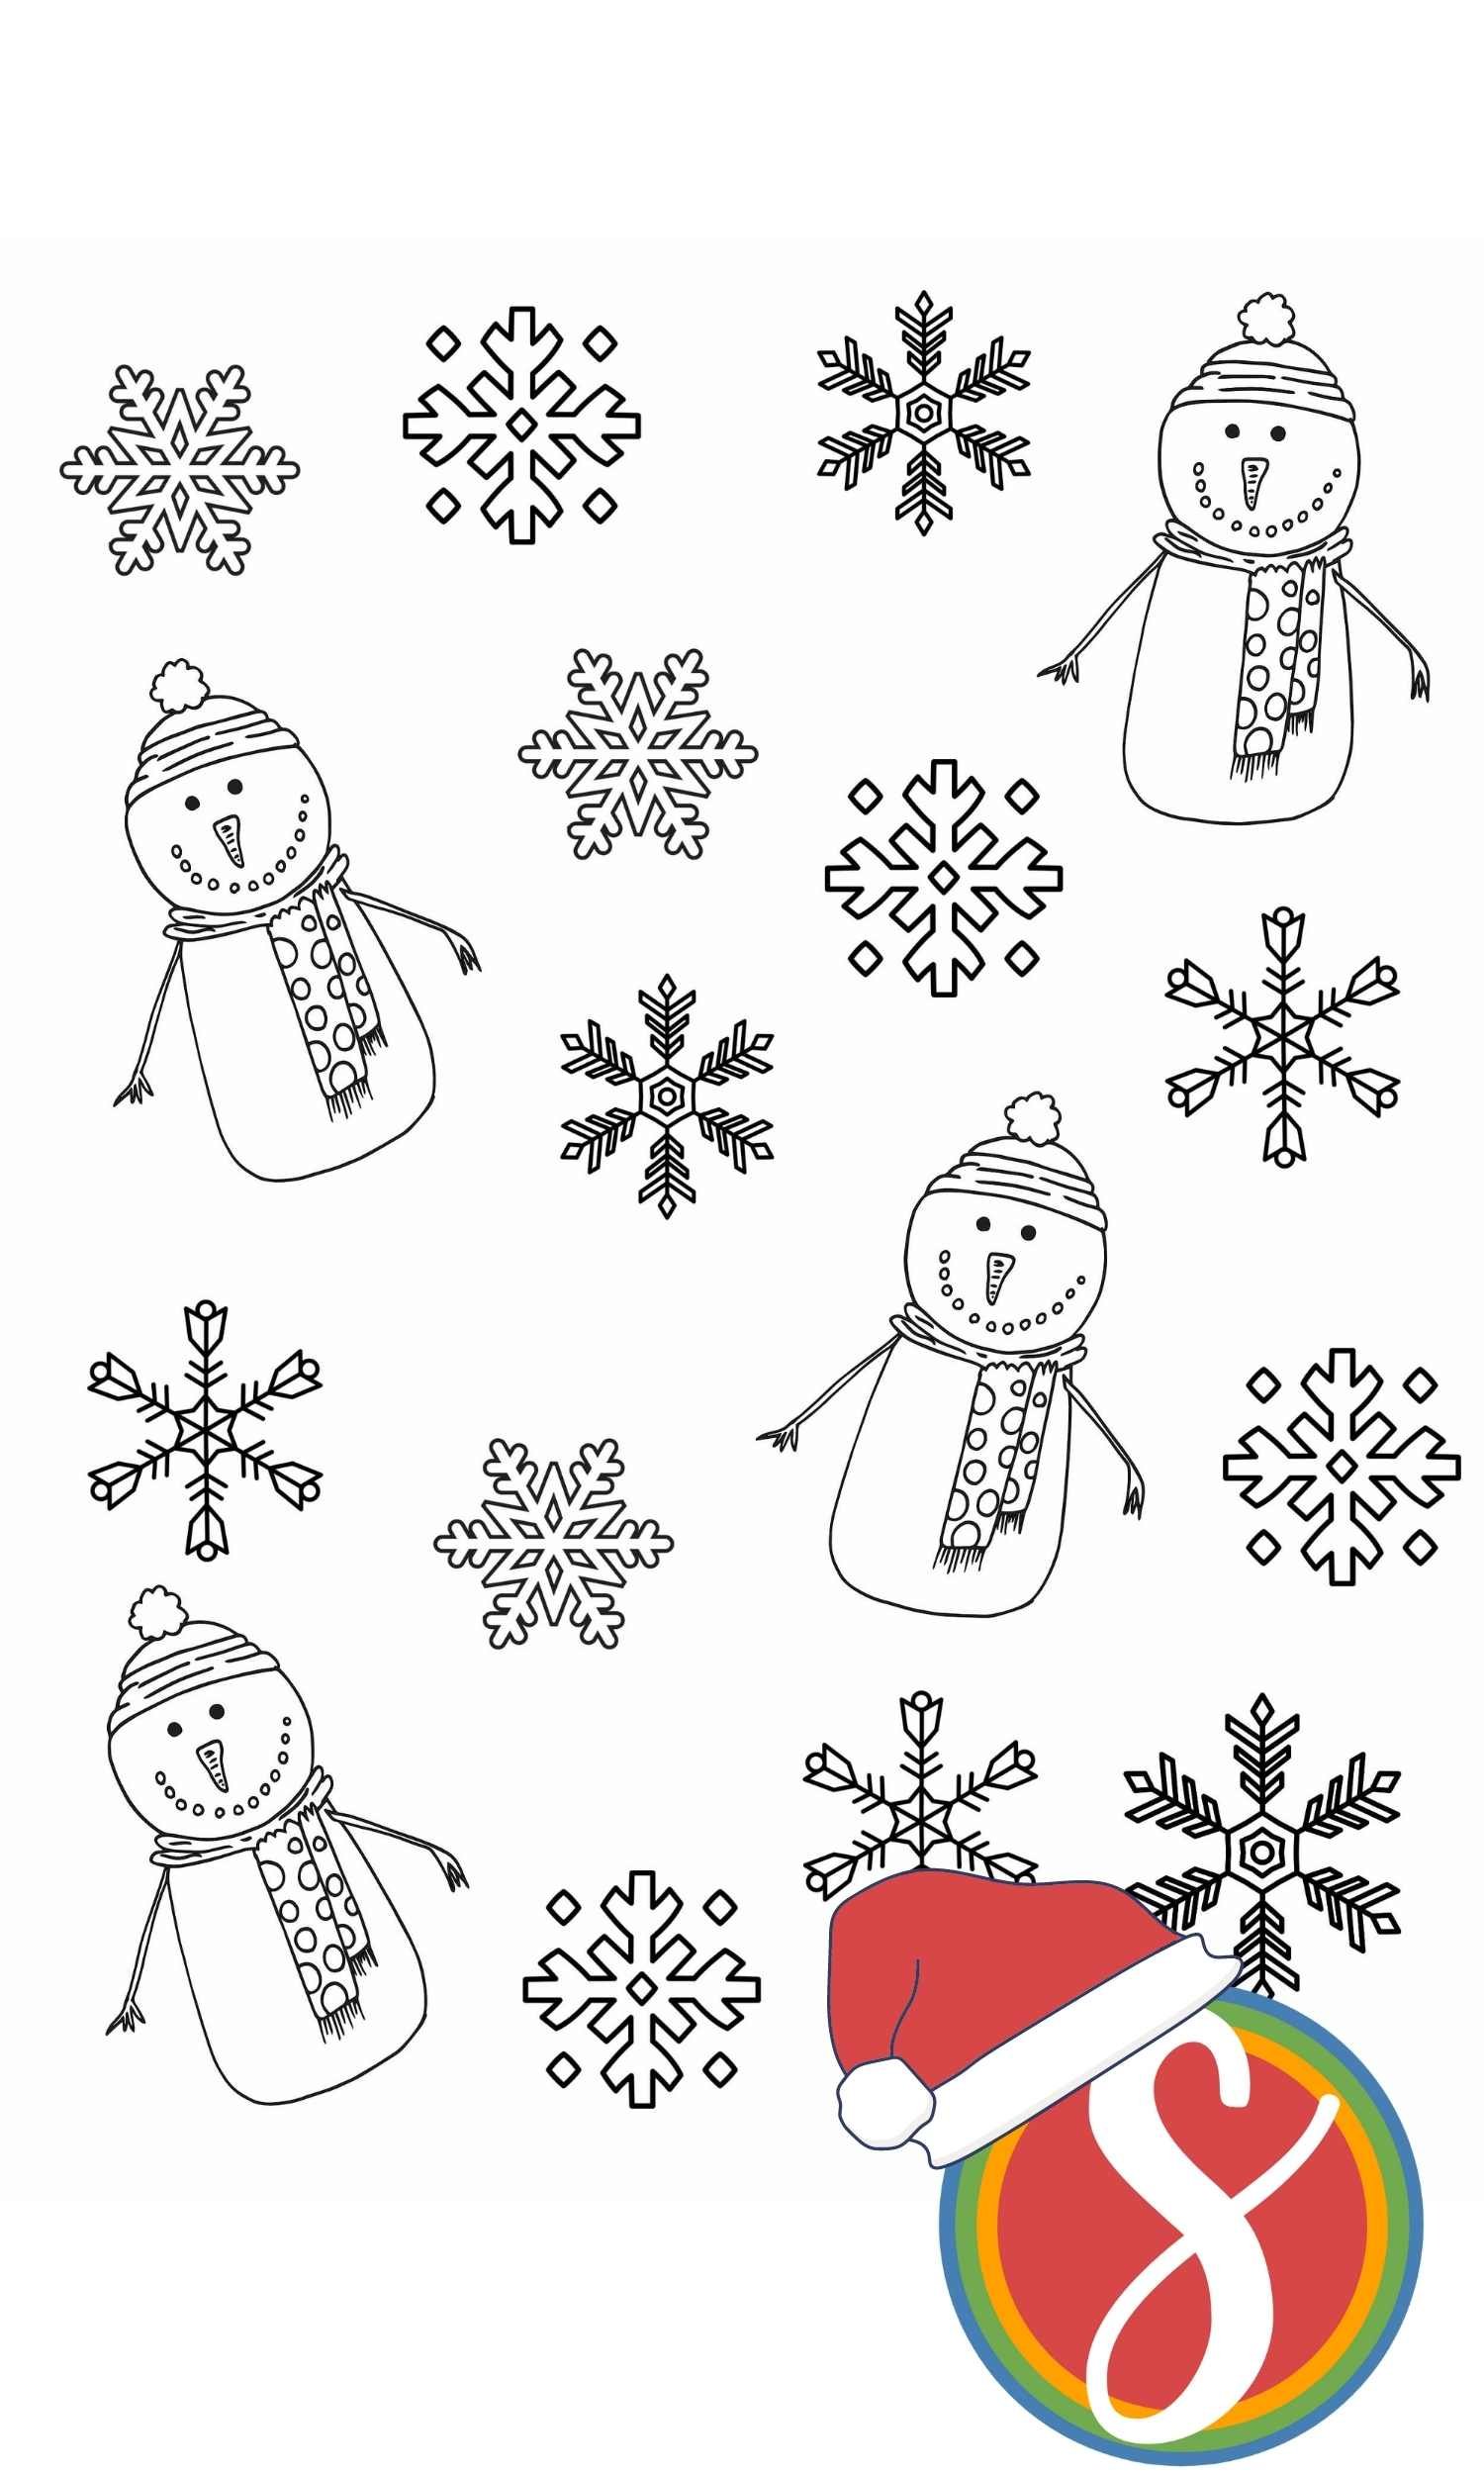 small snowmen and snowflakes in a collage to color